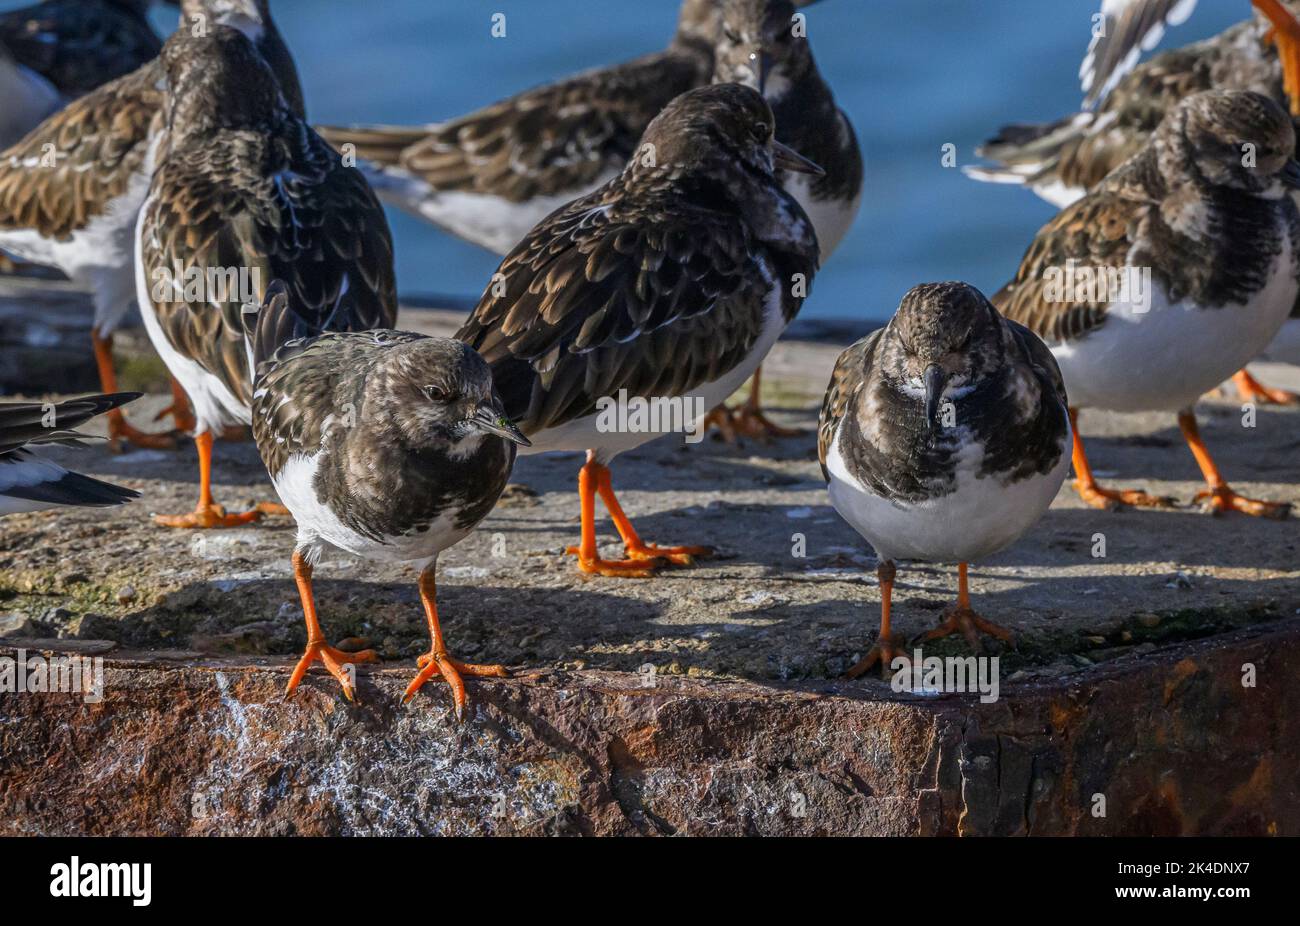 Group of Turnstones, Arenaria interpres, in winter plumage, on jetty awaiting tide changes. Hampshire. Stock Photo